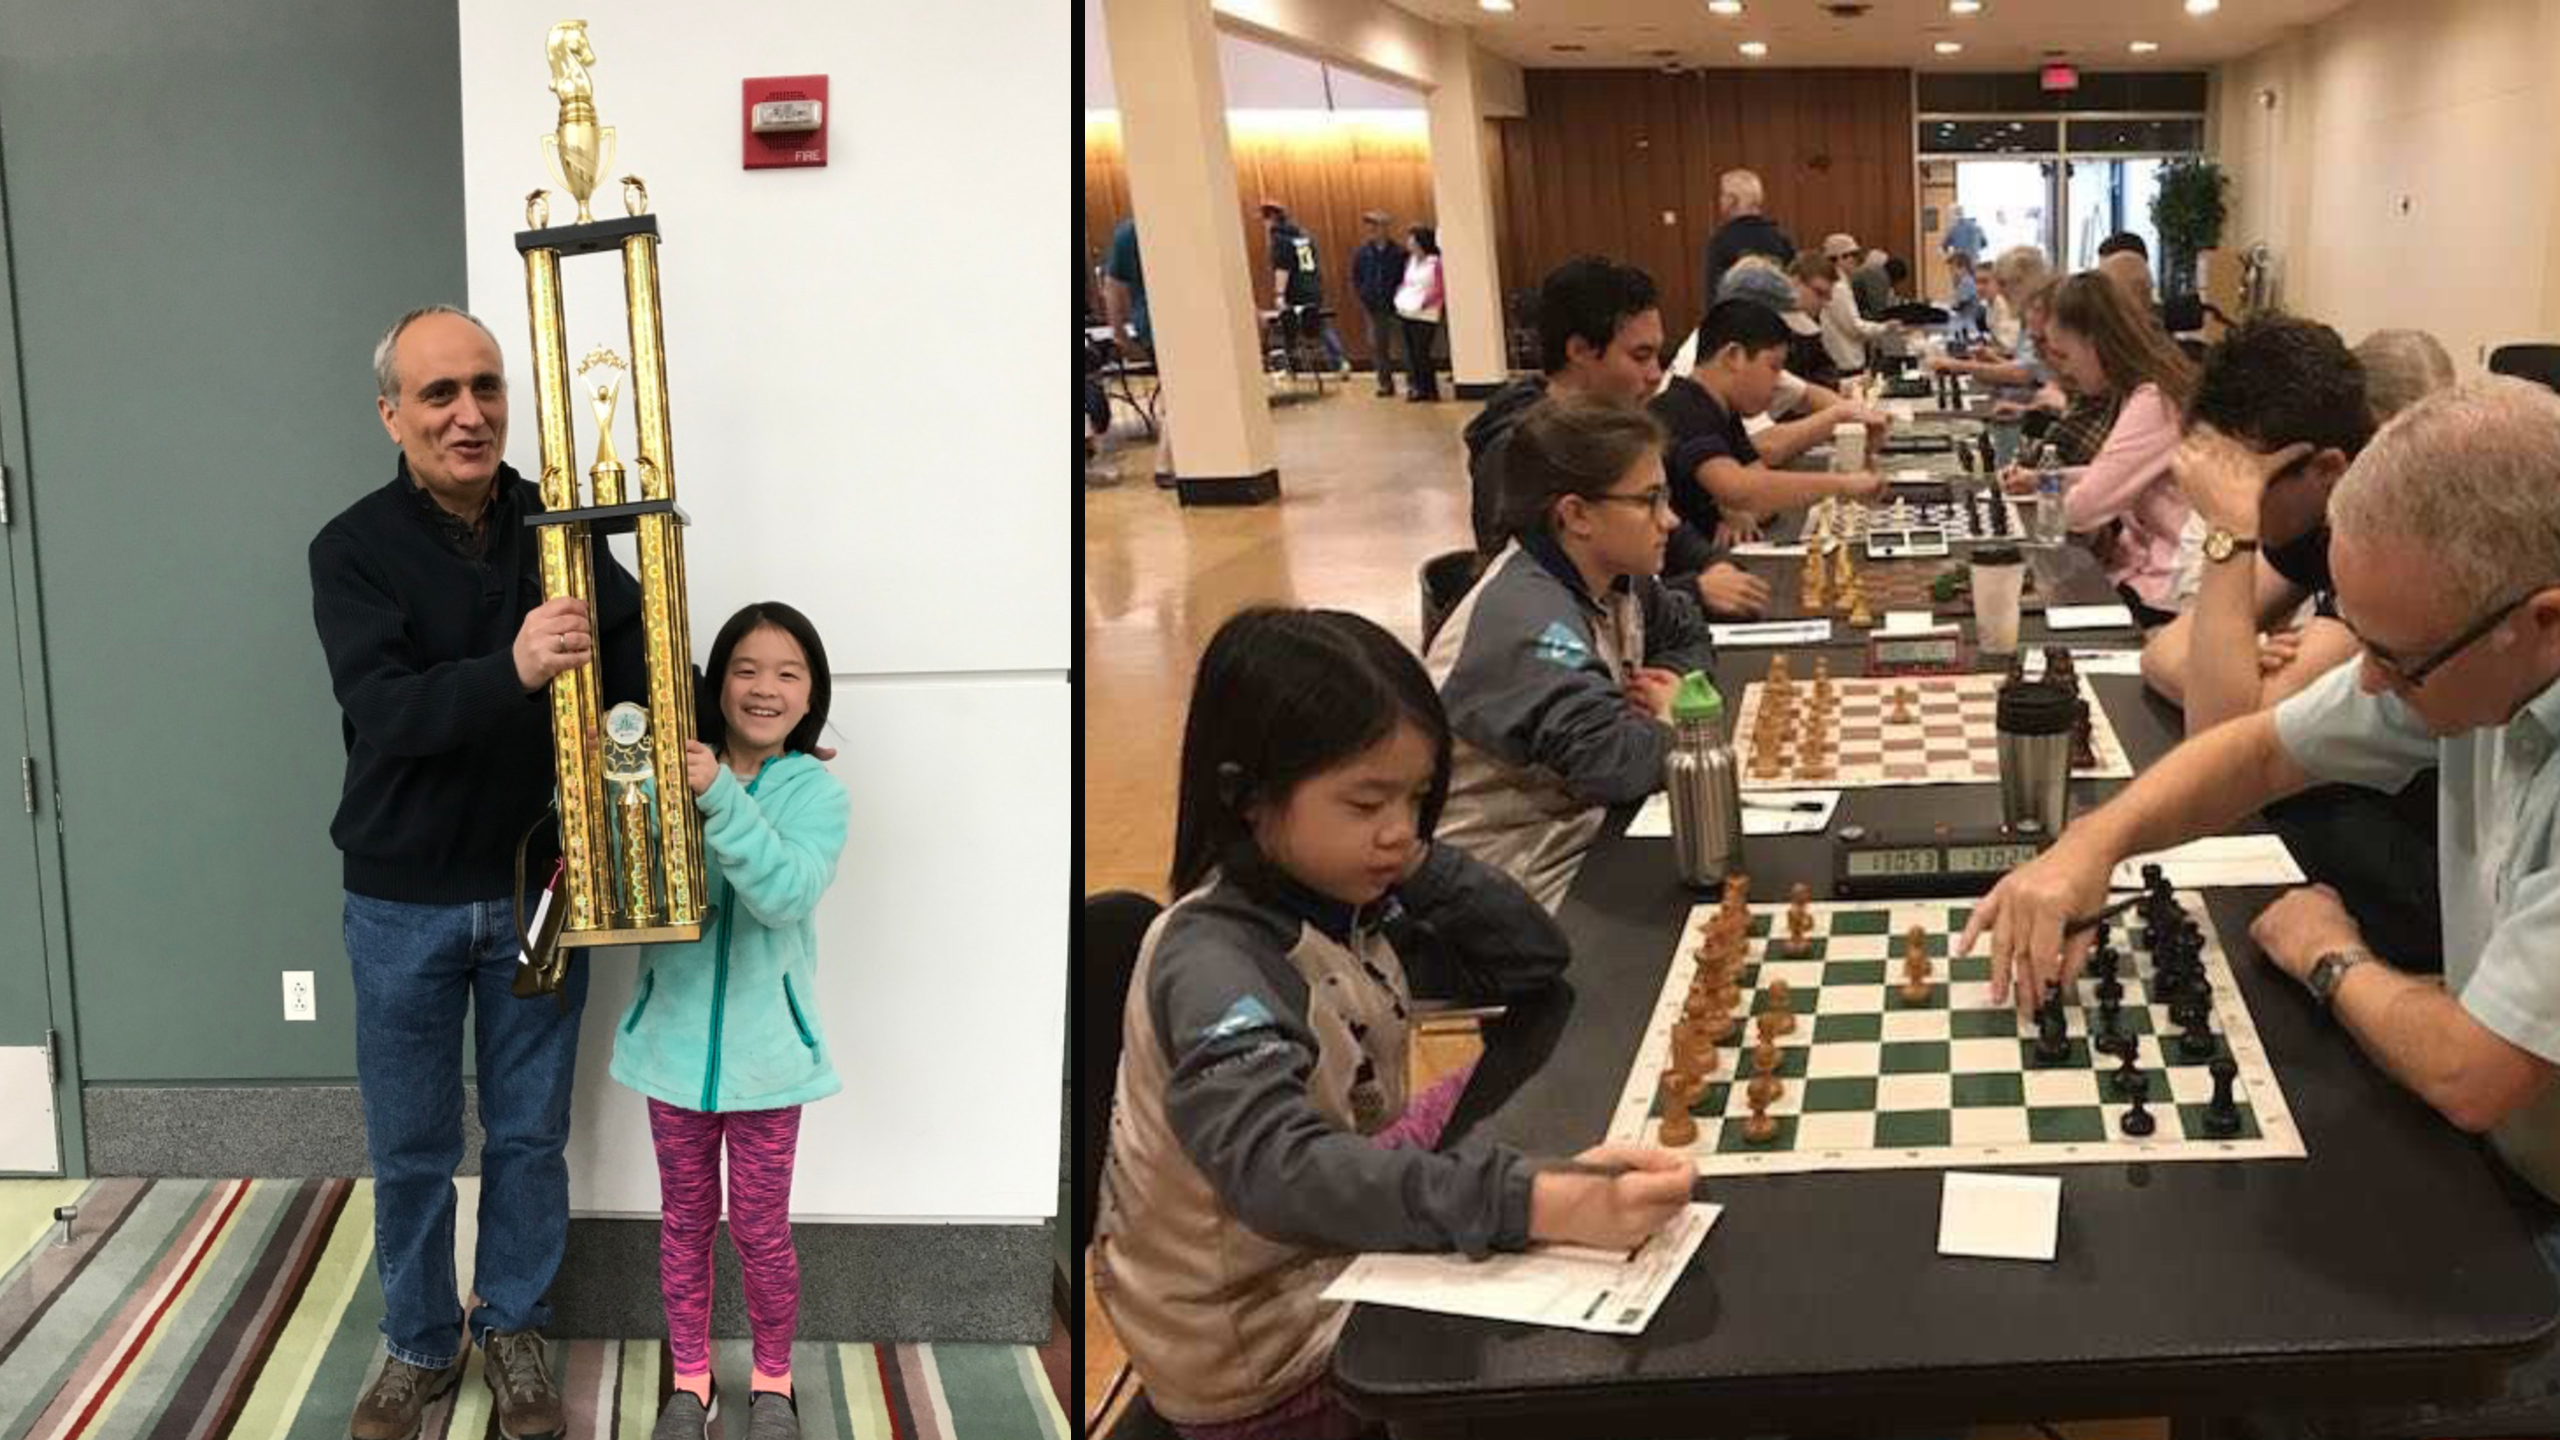 10 year old Minnesota girl is making chess history